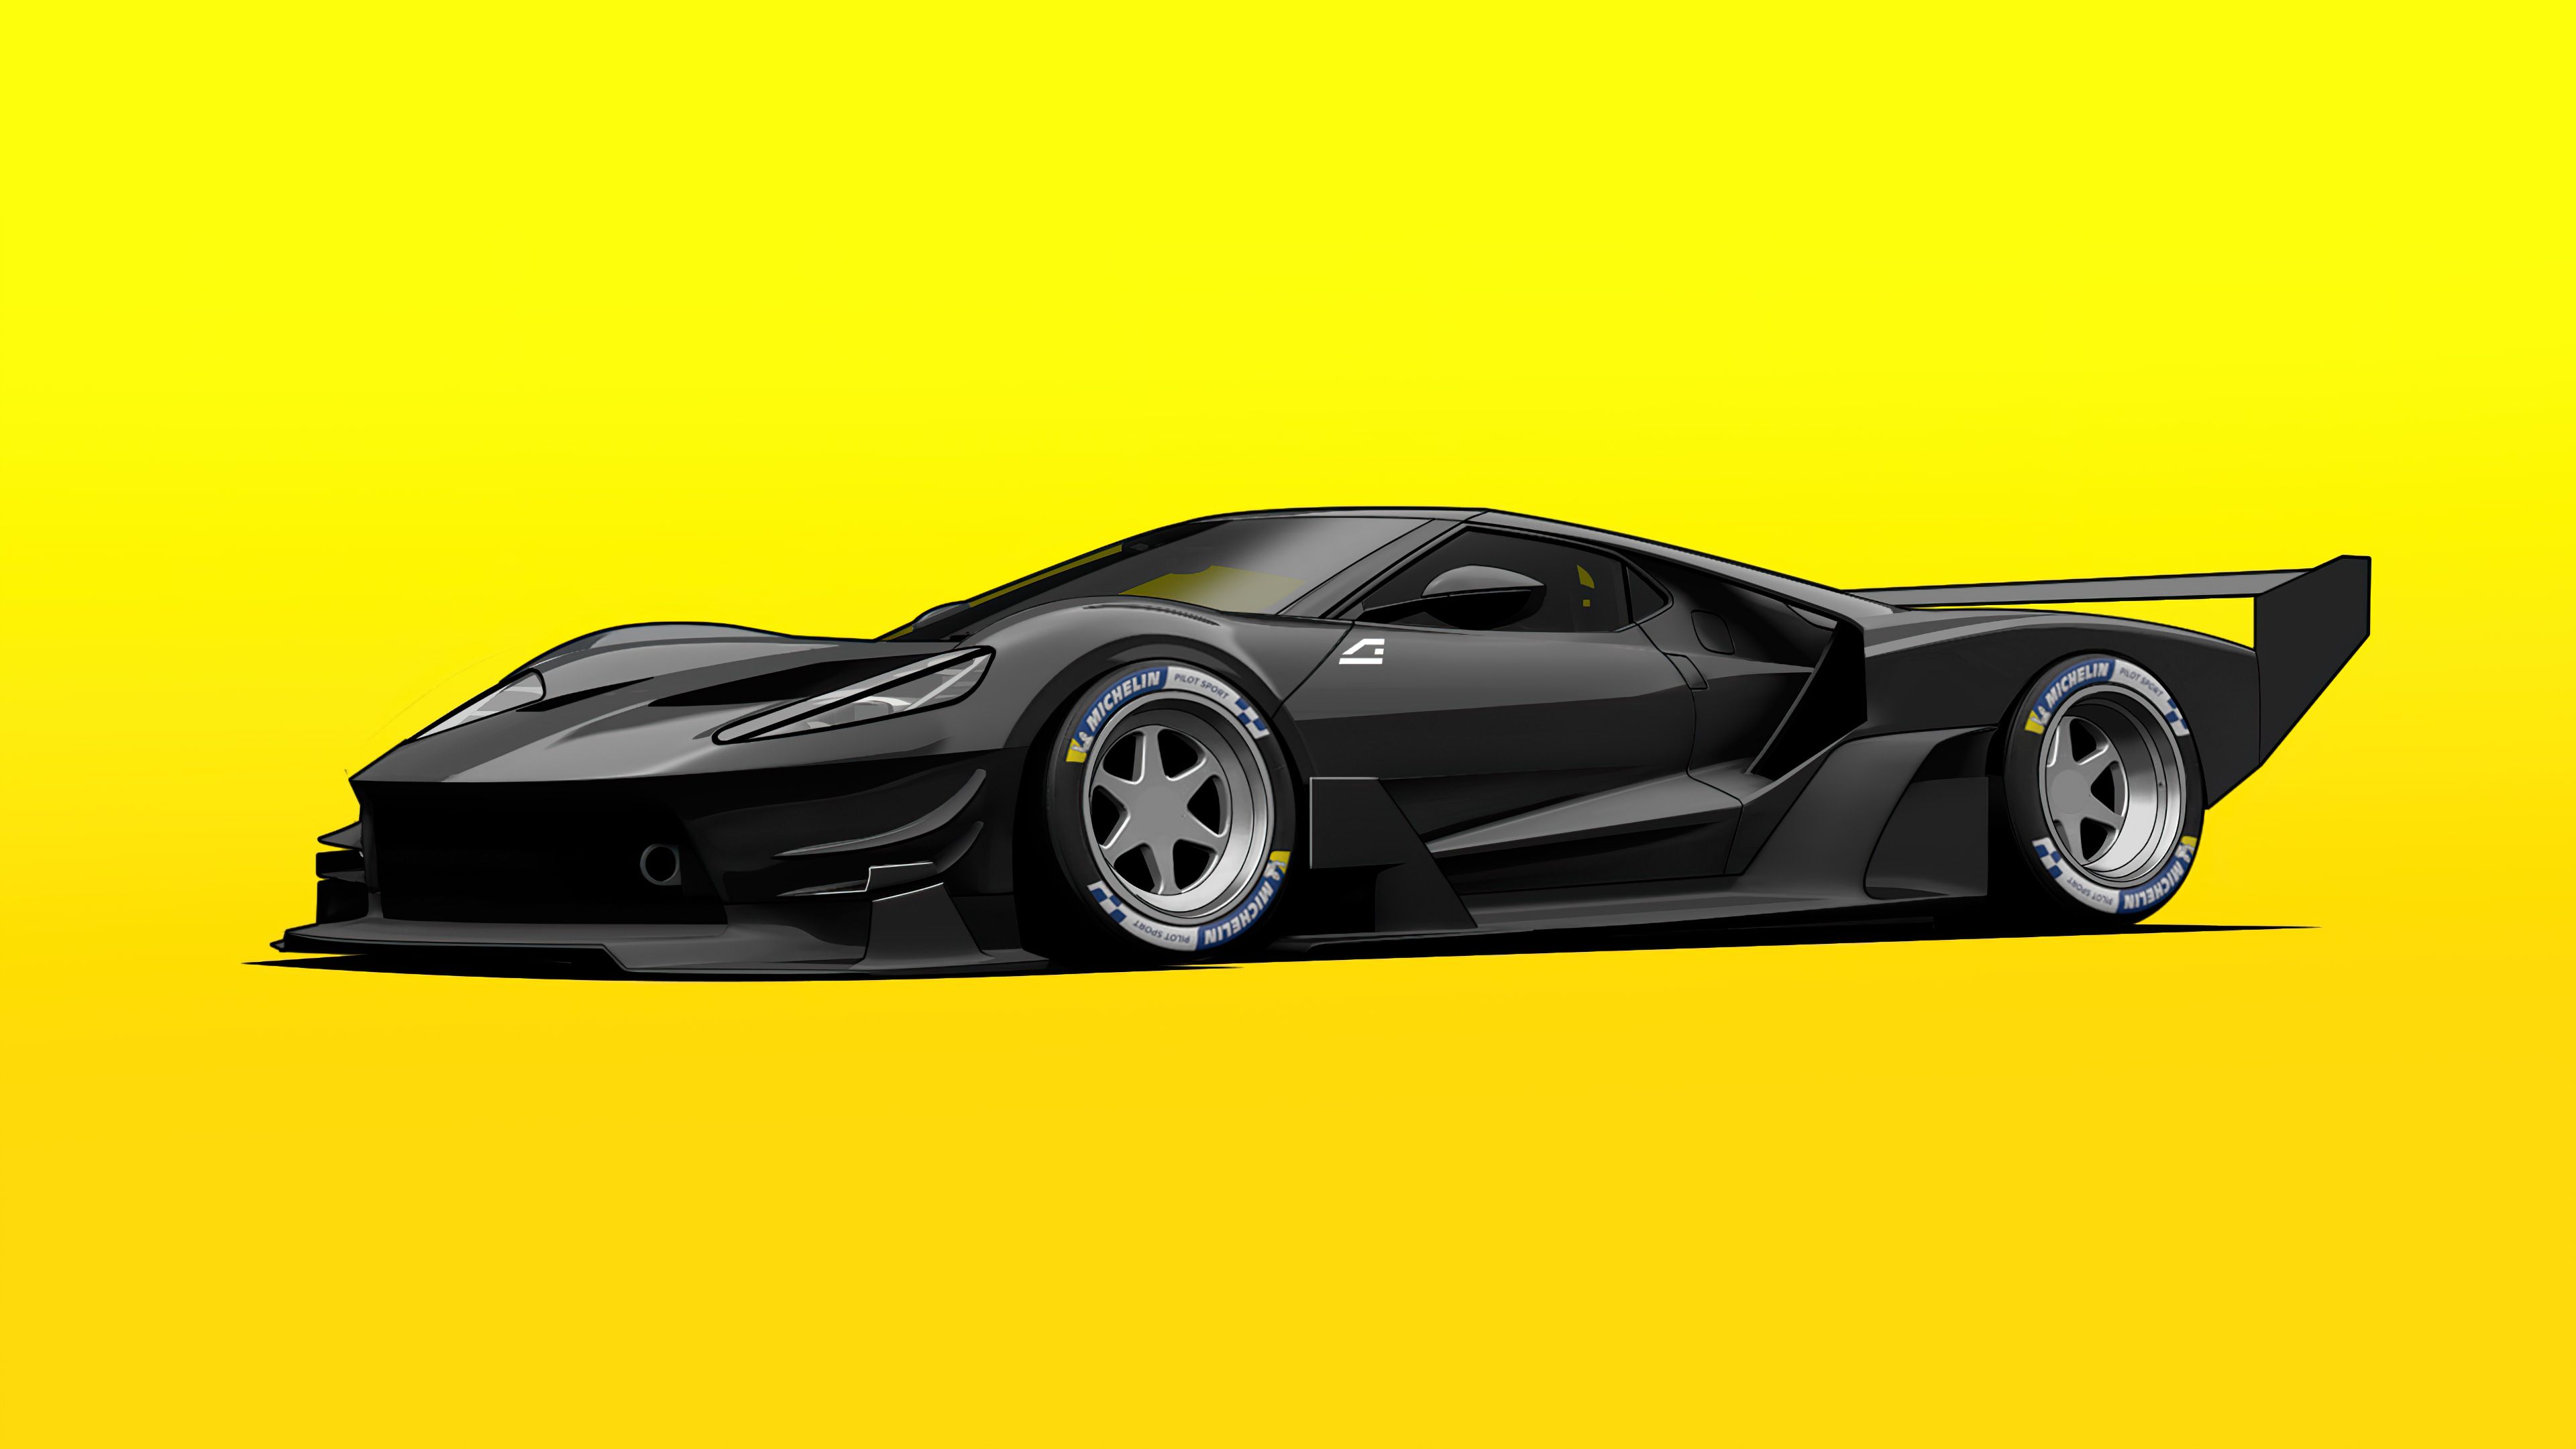 Ford GT C Vgt Minimal Yellow 4k Ford GT C Vgt Minimal Yellow 4k wallpaper. Ford gt, Ford, Wallpaper